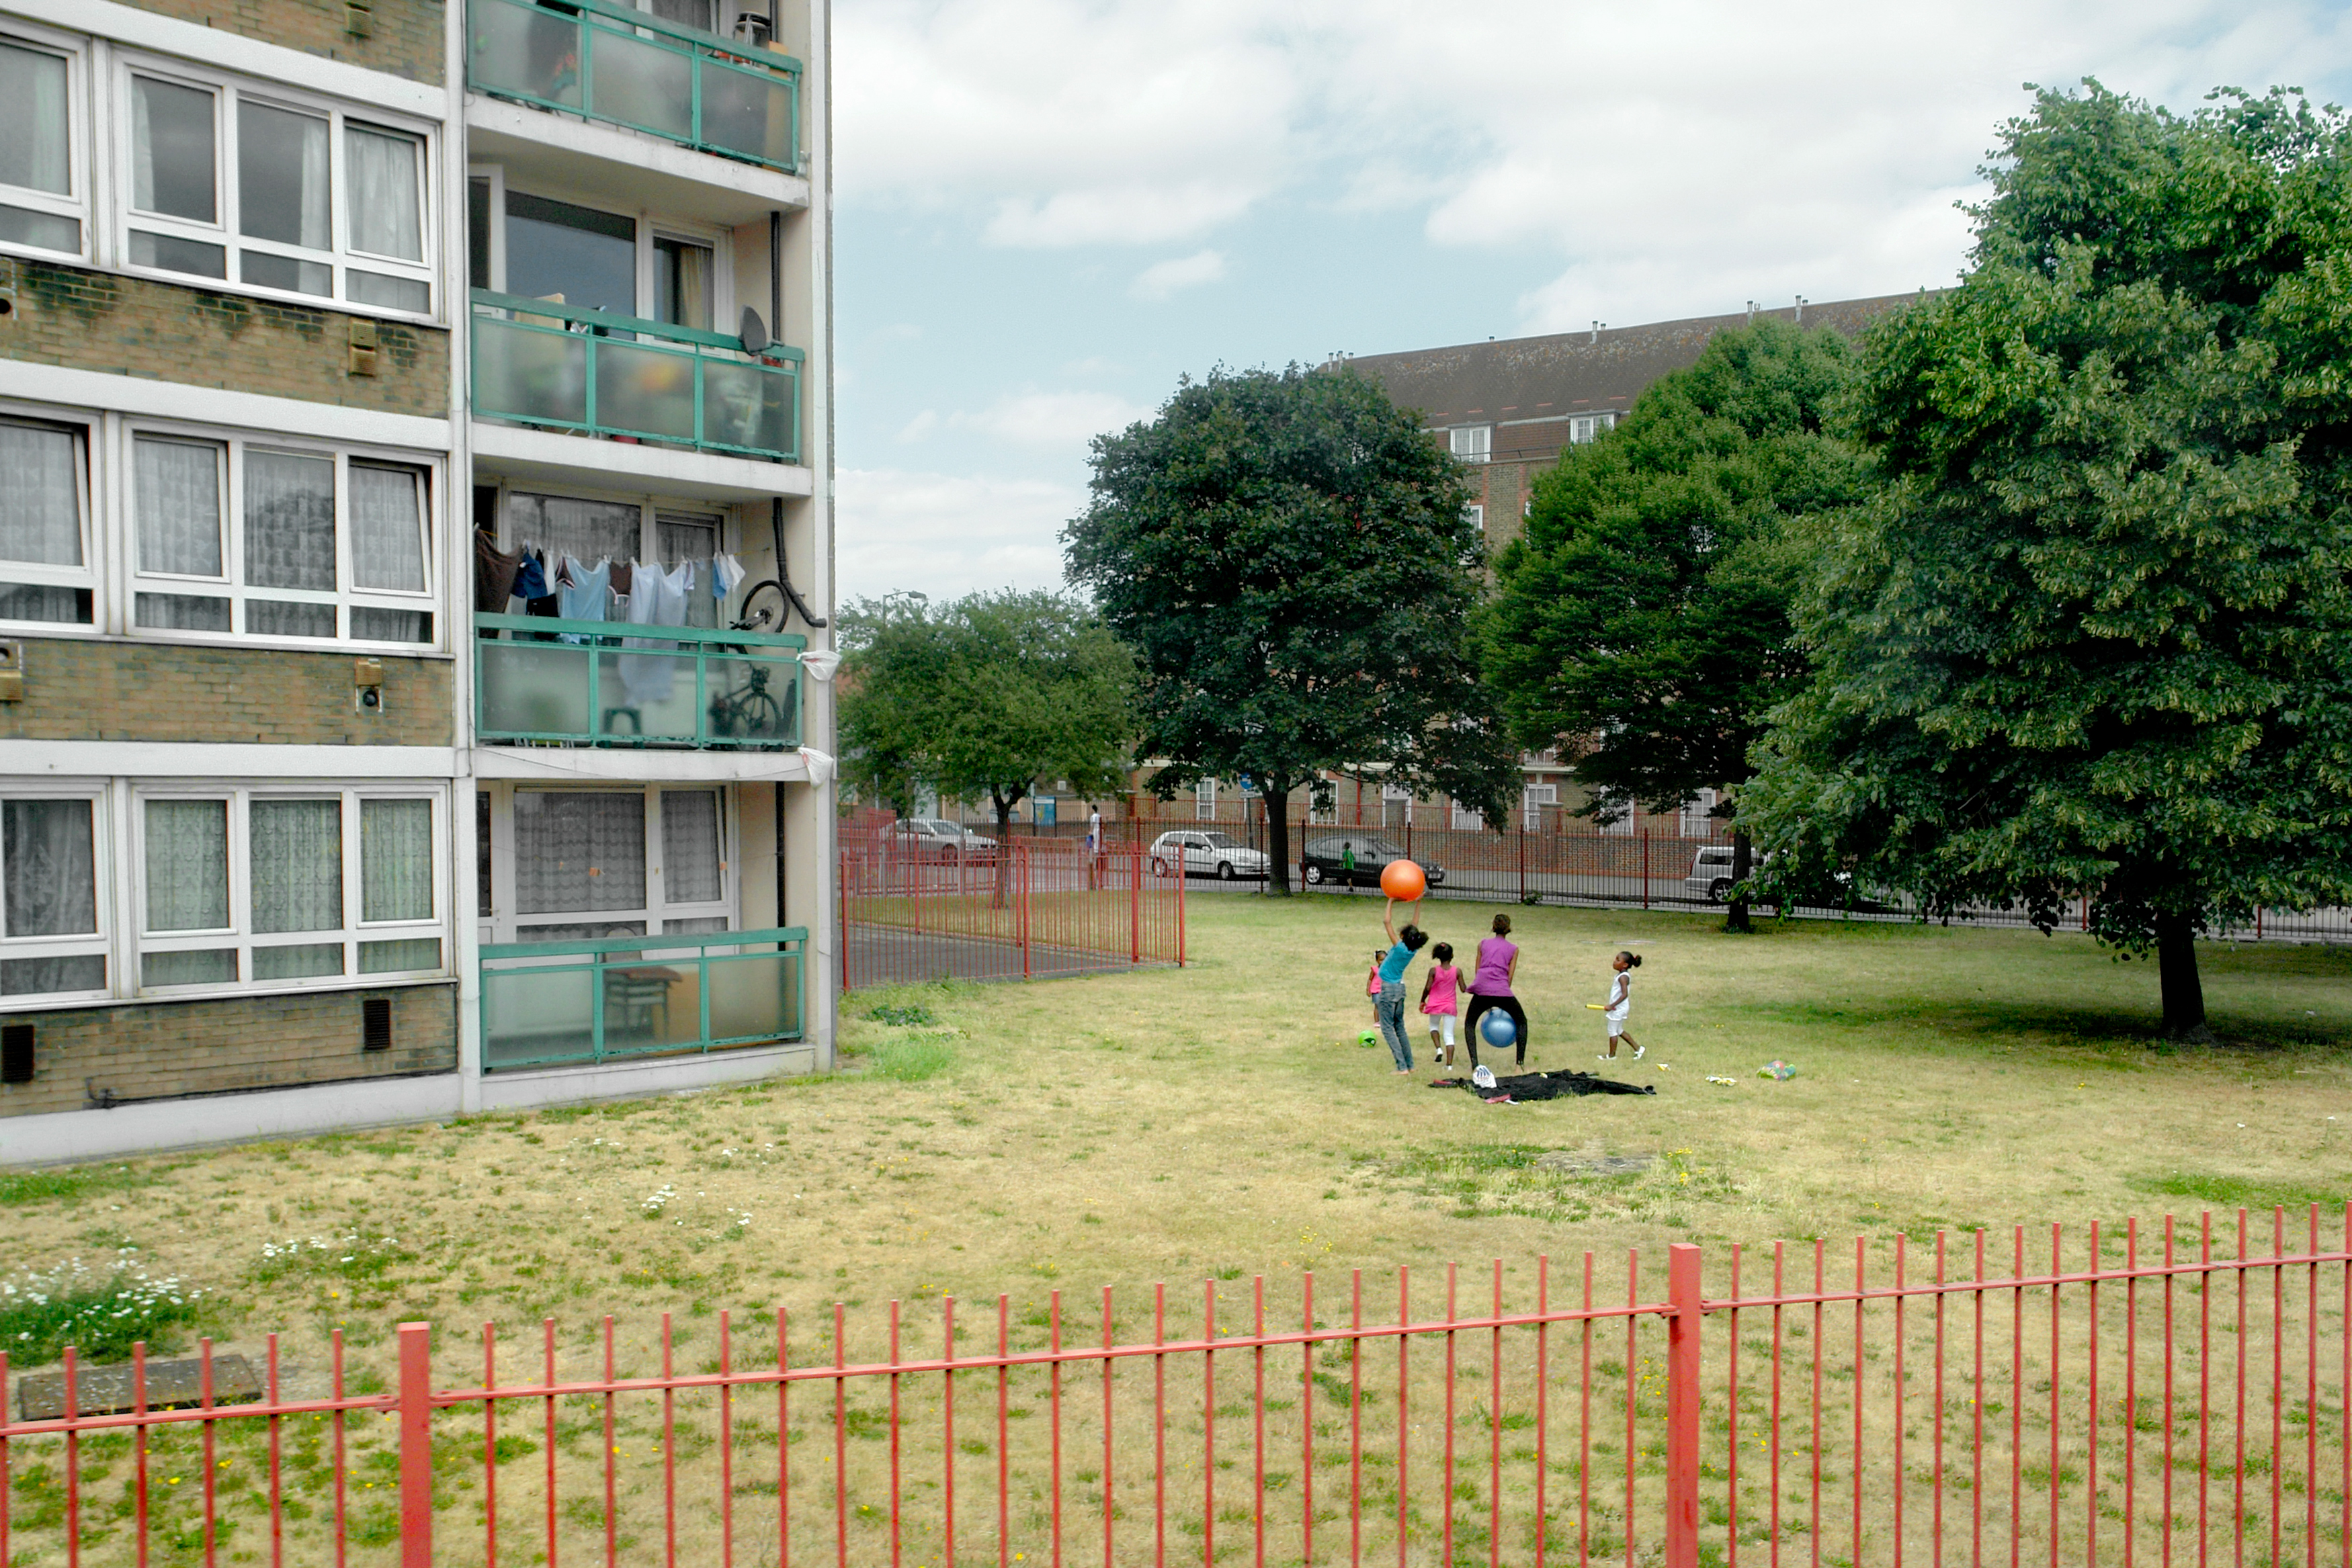 Children play in the gardens of a housing block along the route of Bus 188 between Russell Square and North Greenwich.[This image was photographed through the window of one of London's double decker busses and is part of 'Last Stop', a photo project now published as a book, which aims to document the city, its movements and migrations, its landscape and architecture, its diversity and energy.]